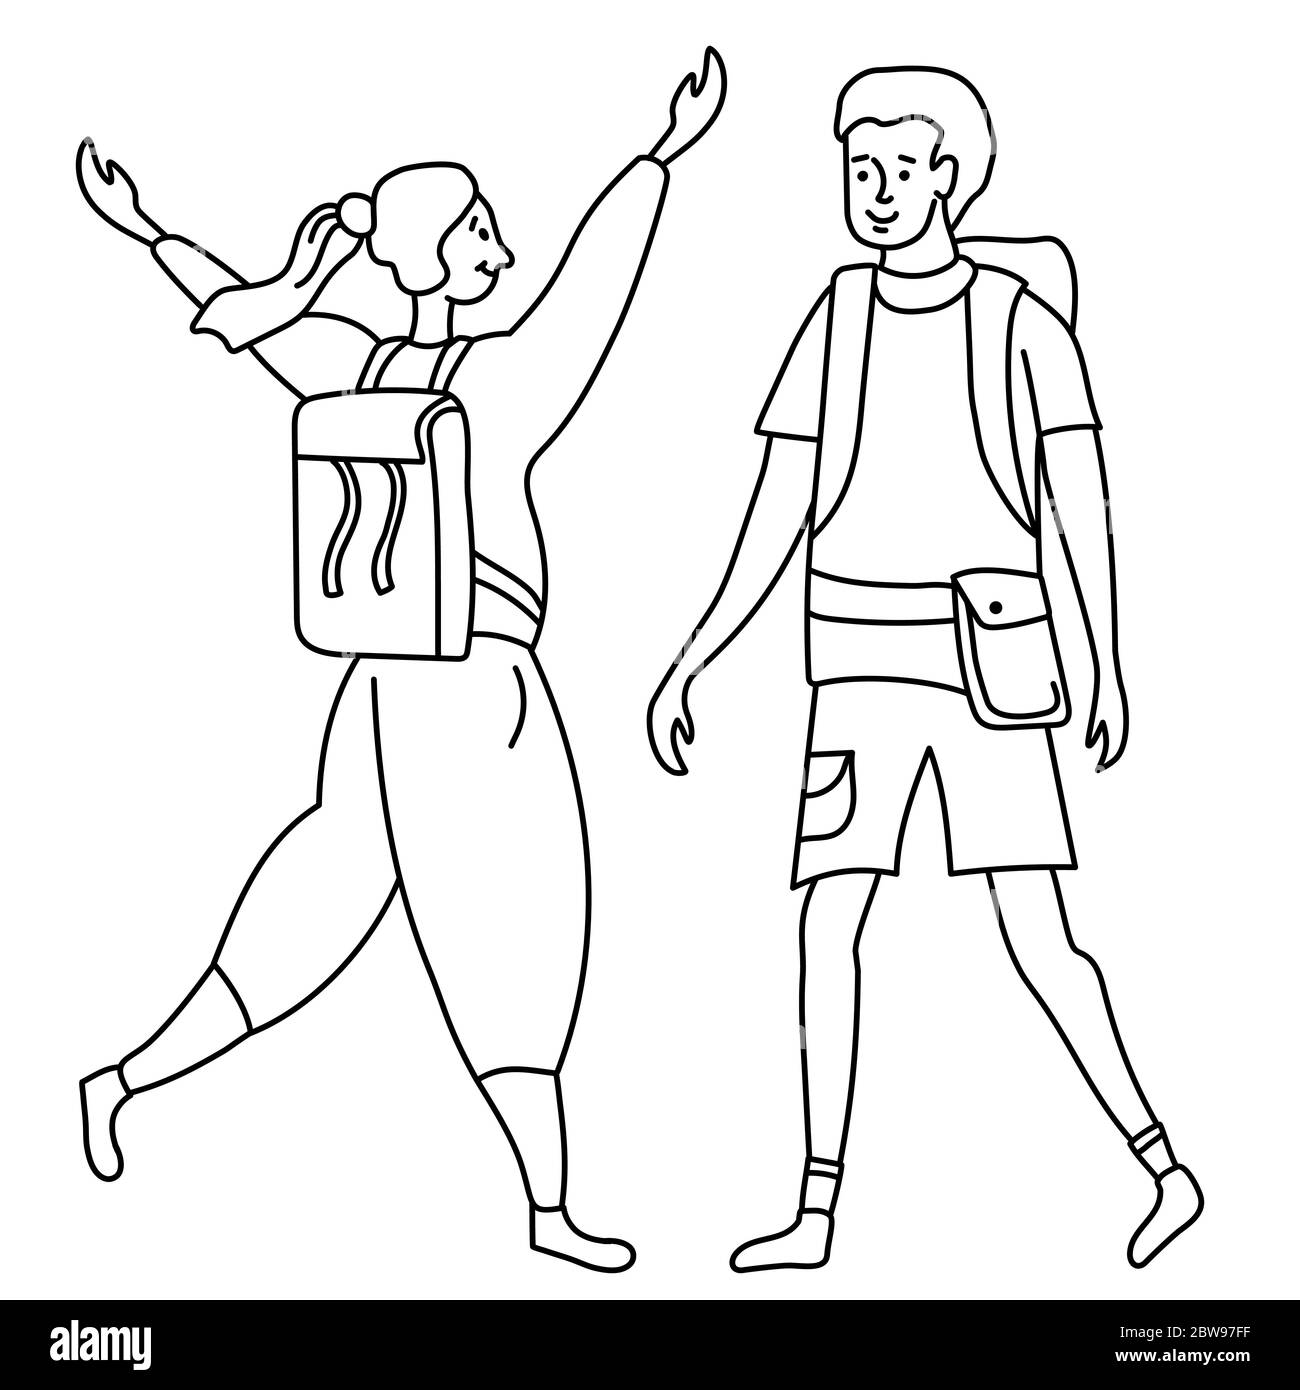 Linear outline drawing girl and guy tourists. She rejoices at the meeting, raised her hands and a backpack on her back. He is with a backpack behind Stock Vector